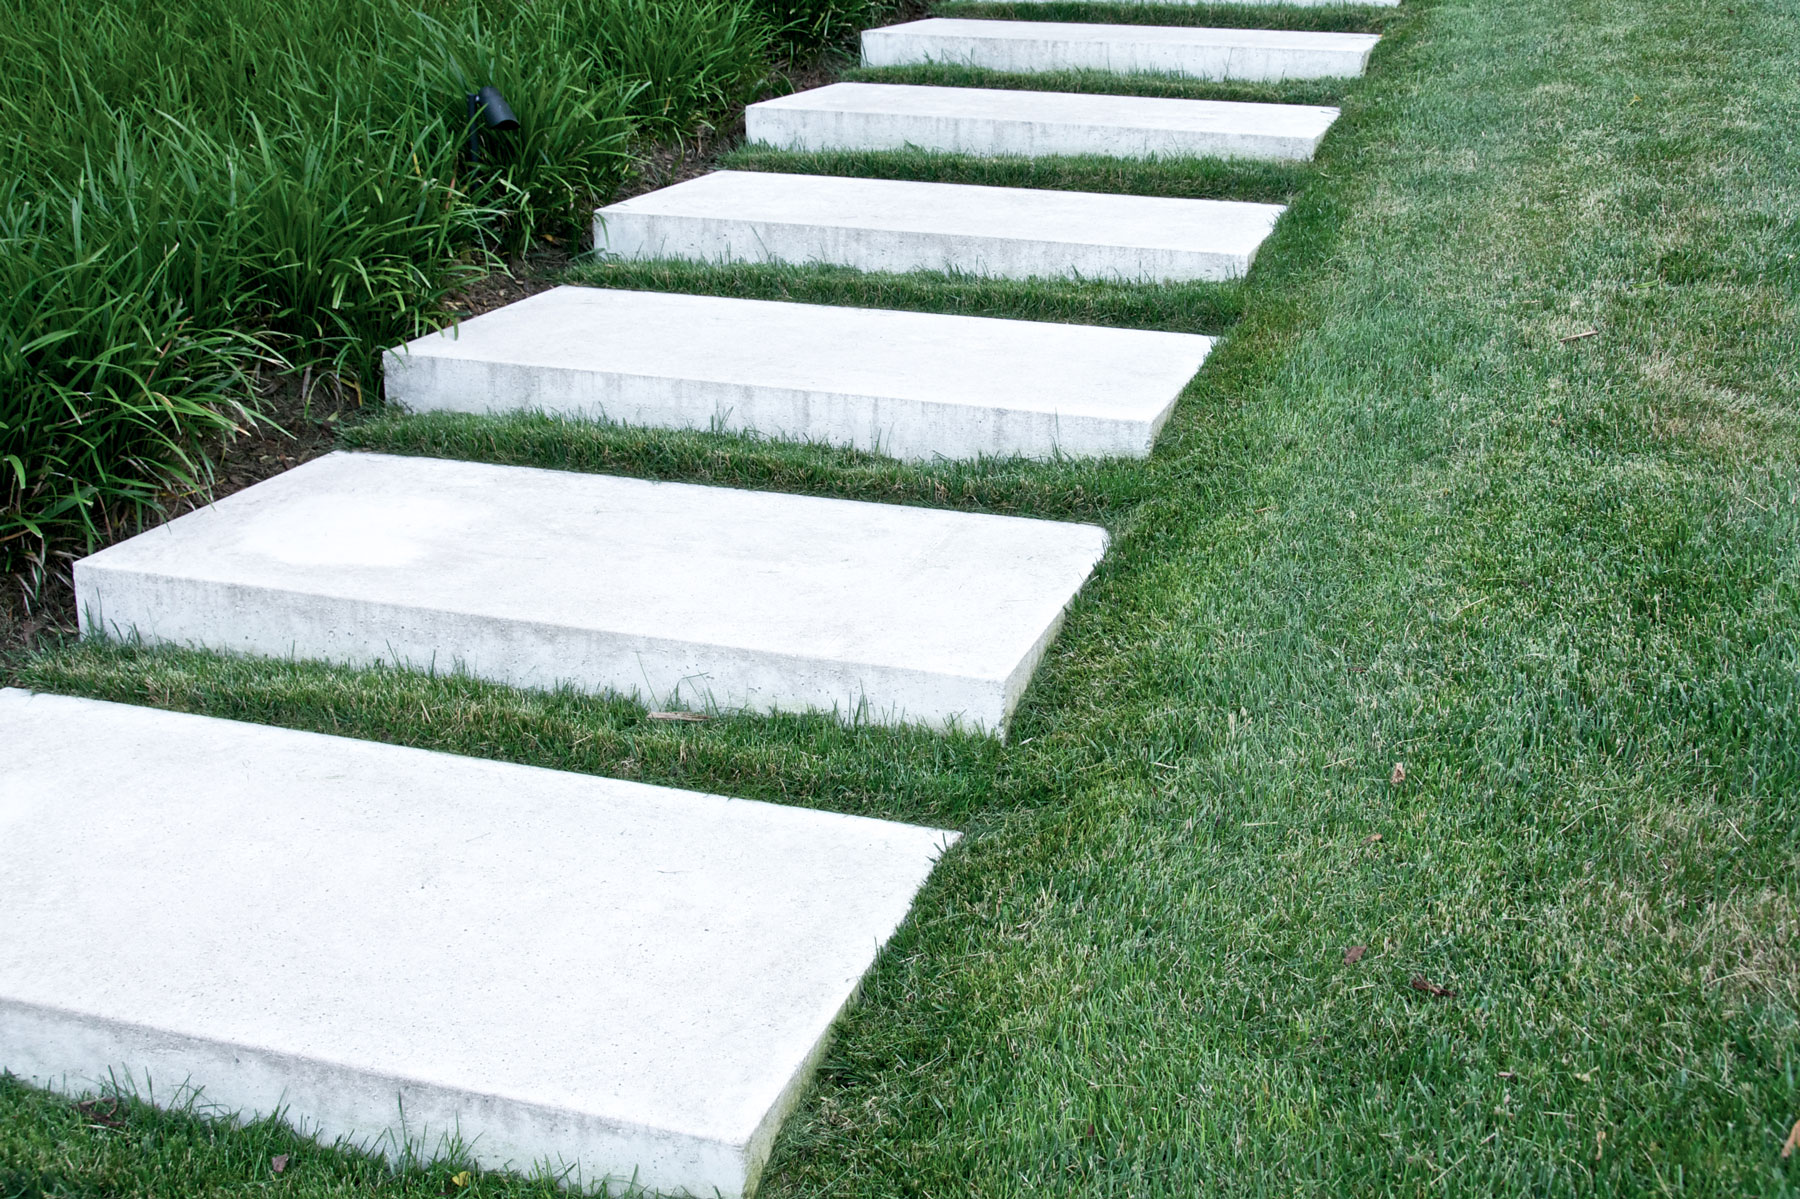 Slab steps can also be in a gentle slope